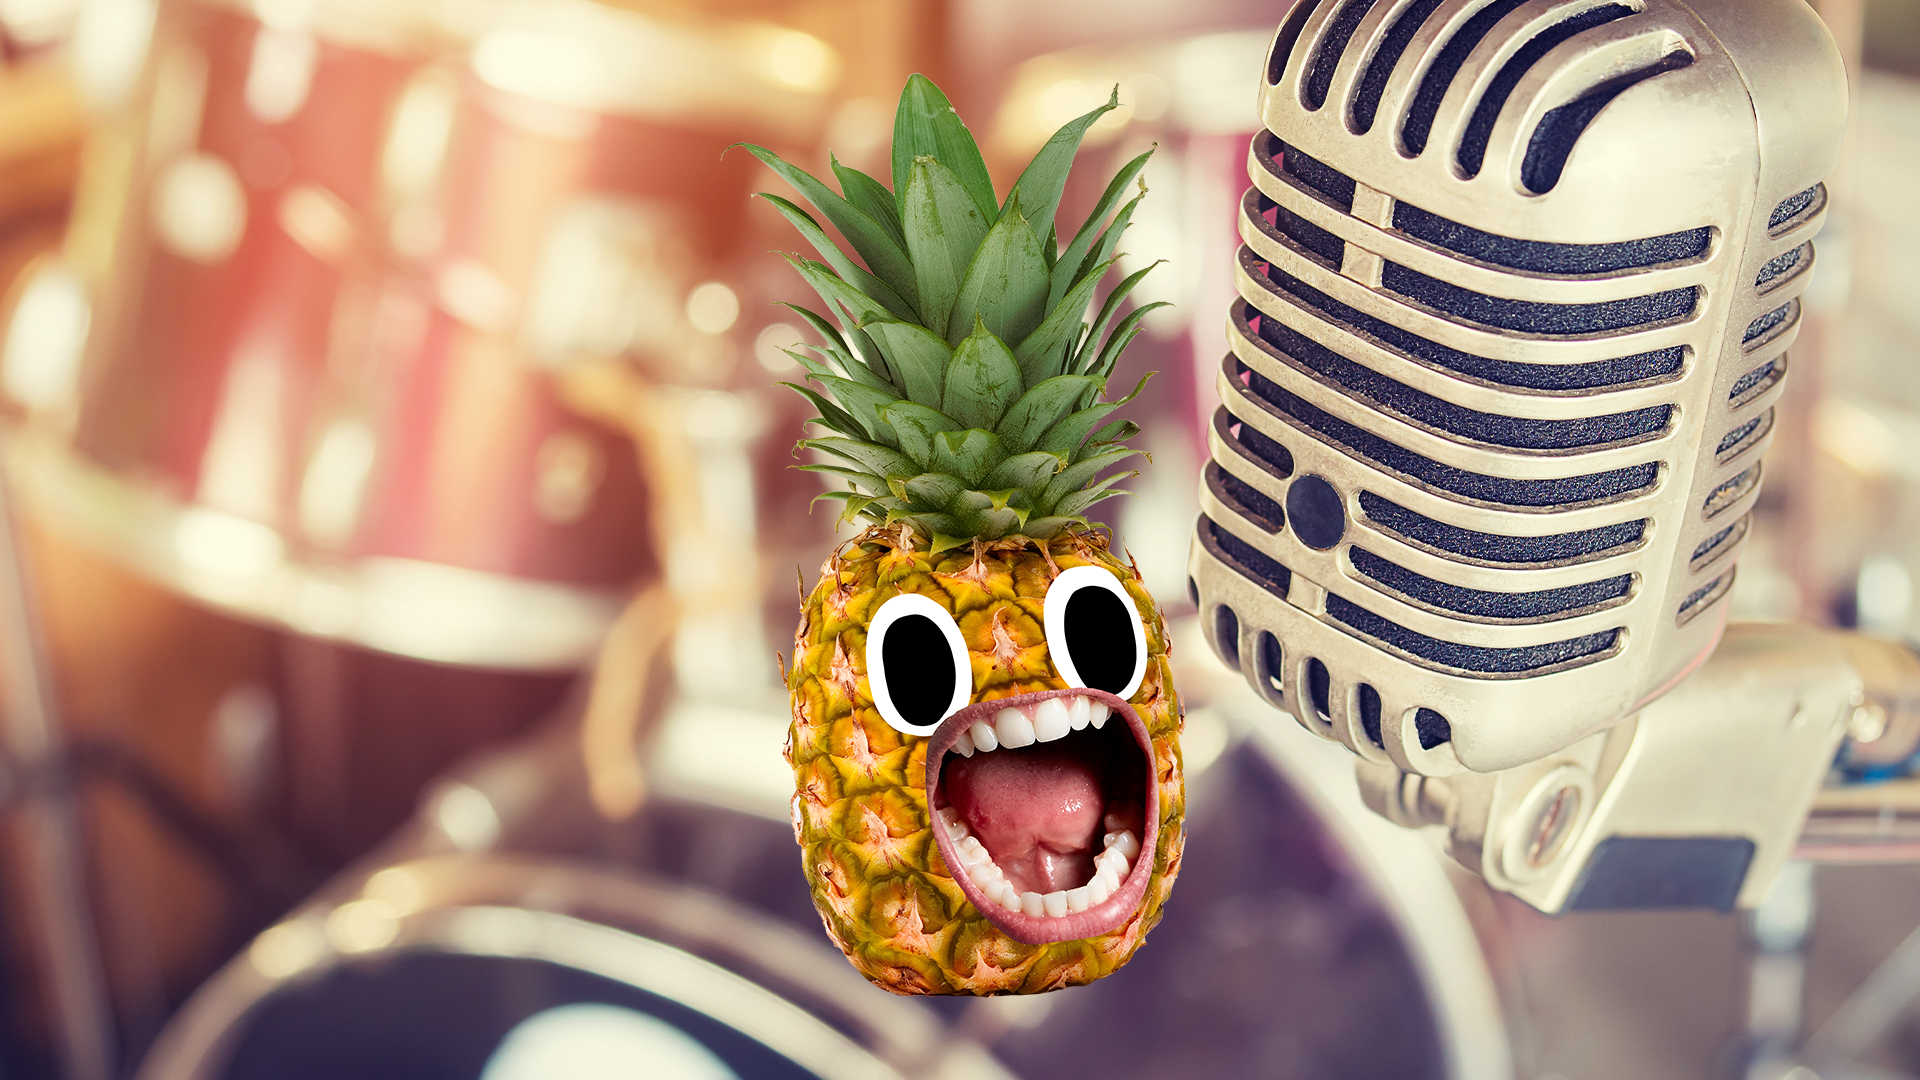 Pineapple singing into an old fashioned mic